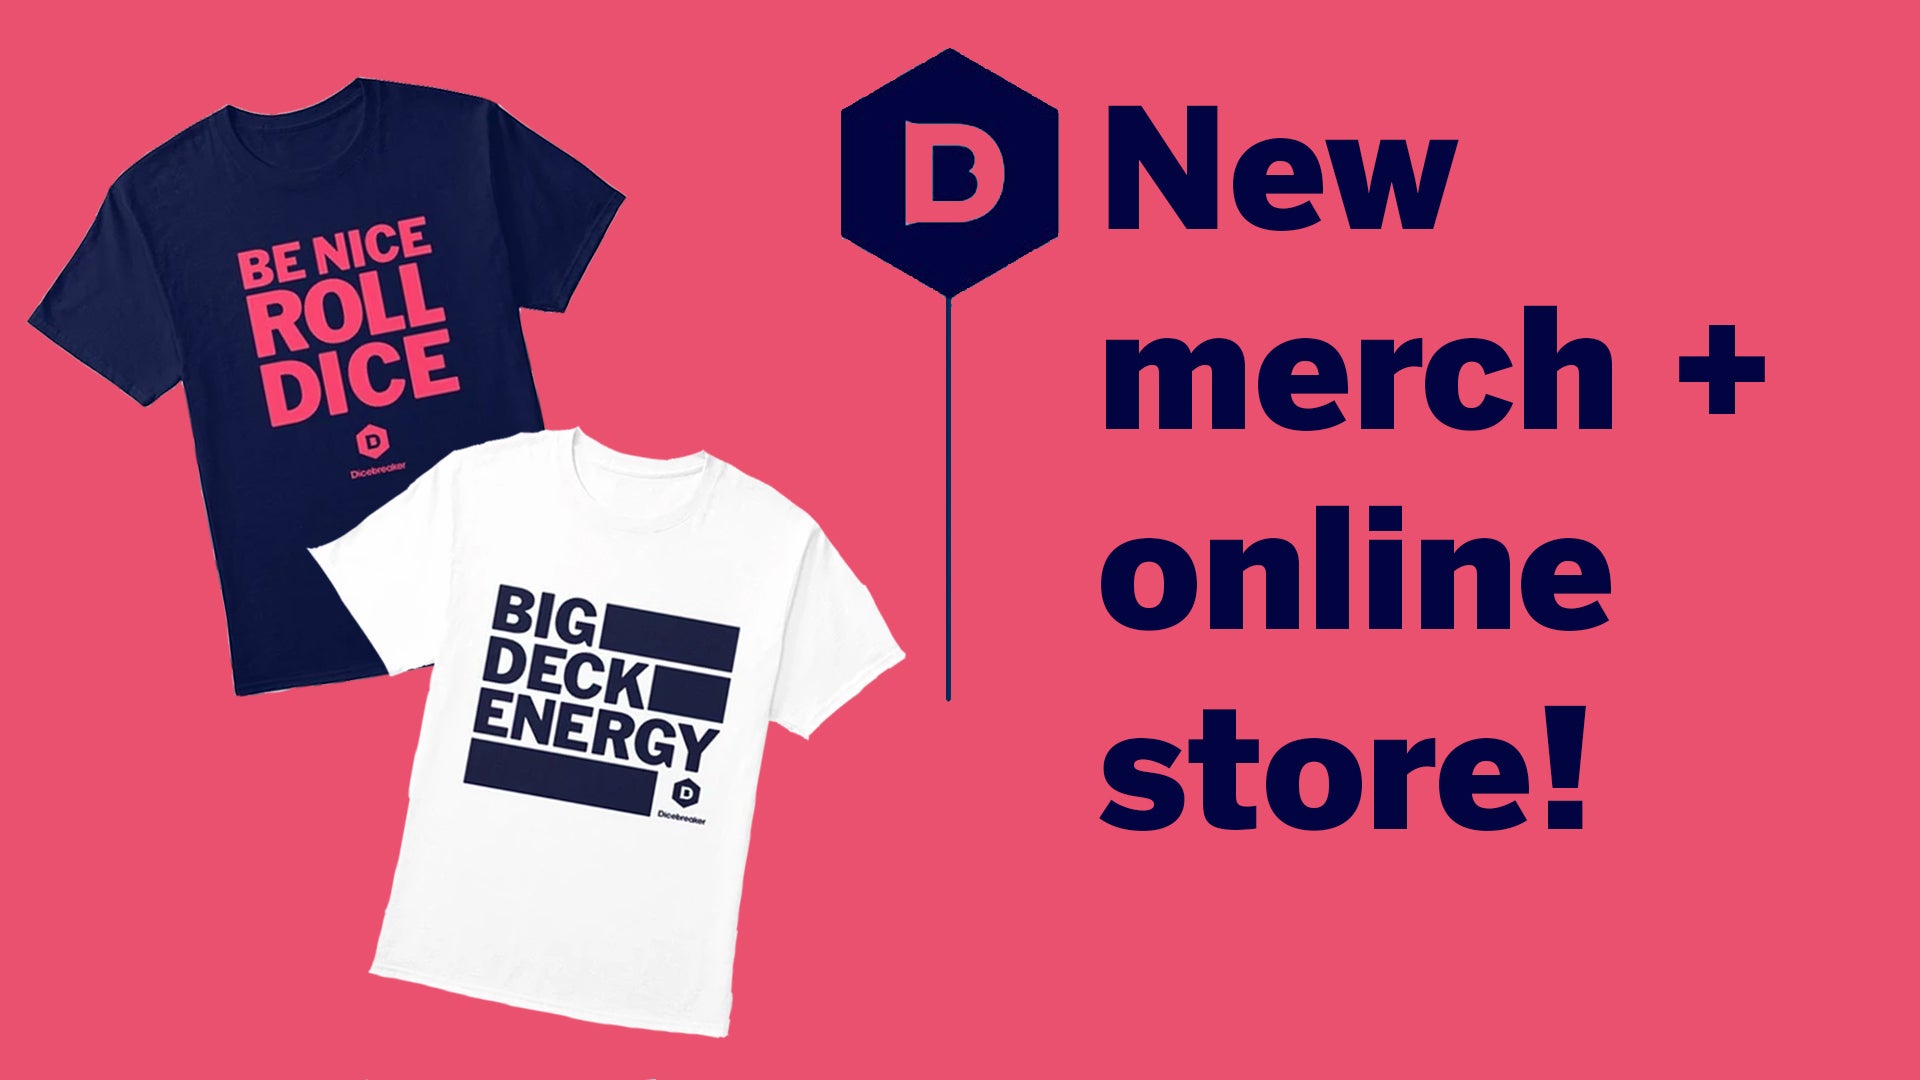 Image for The Dicebreaker merchandise store is open now, featuring two new T-shirt designs!